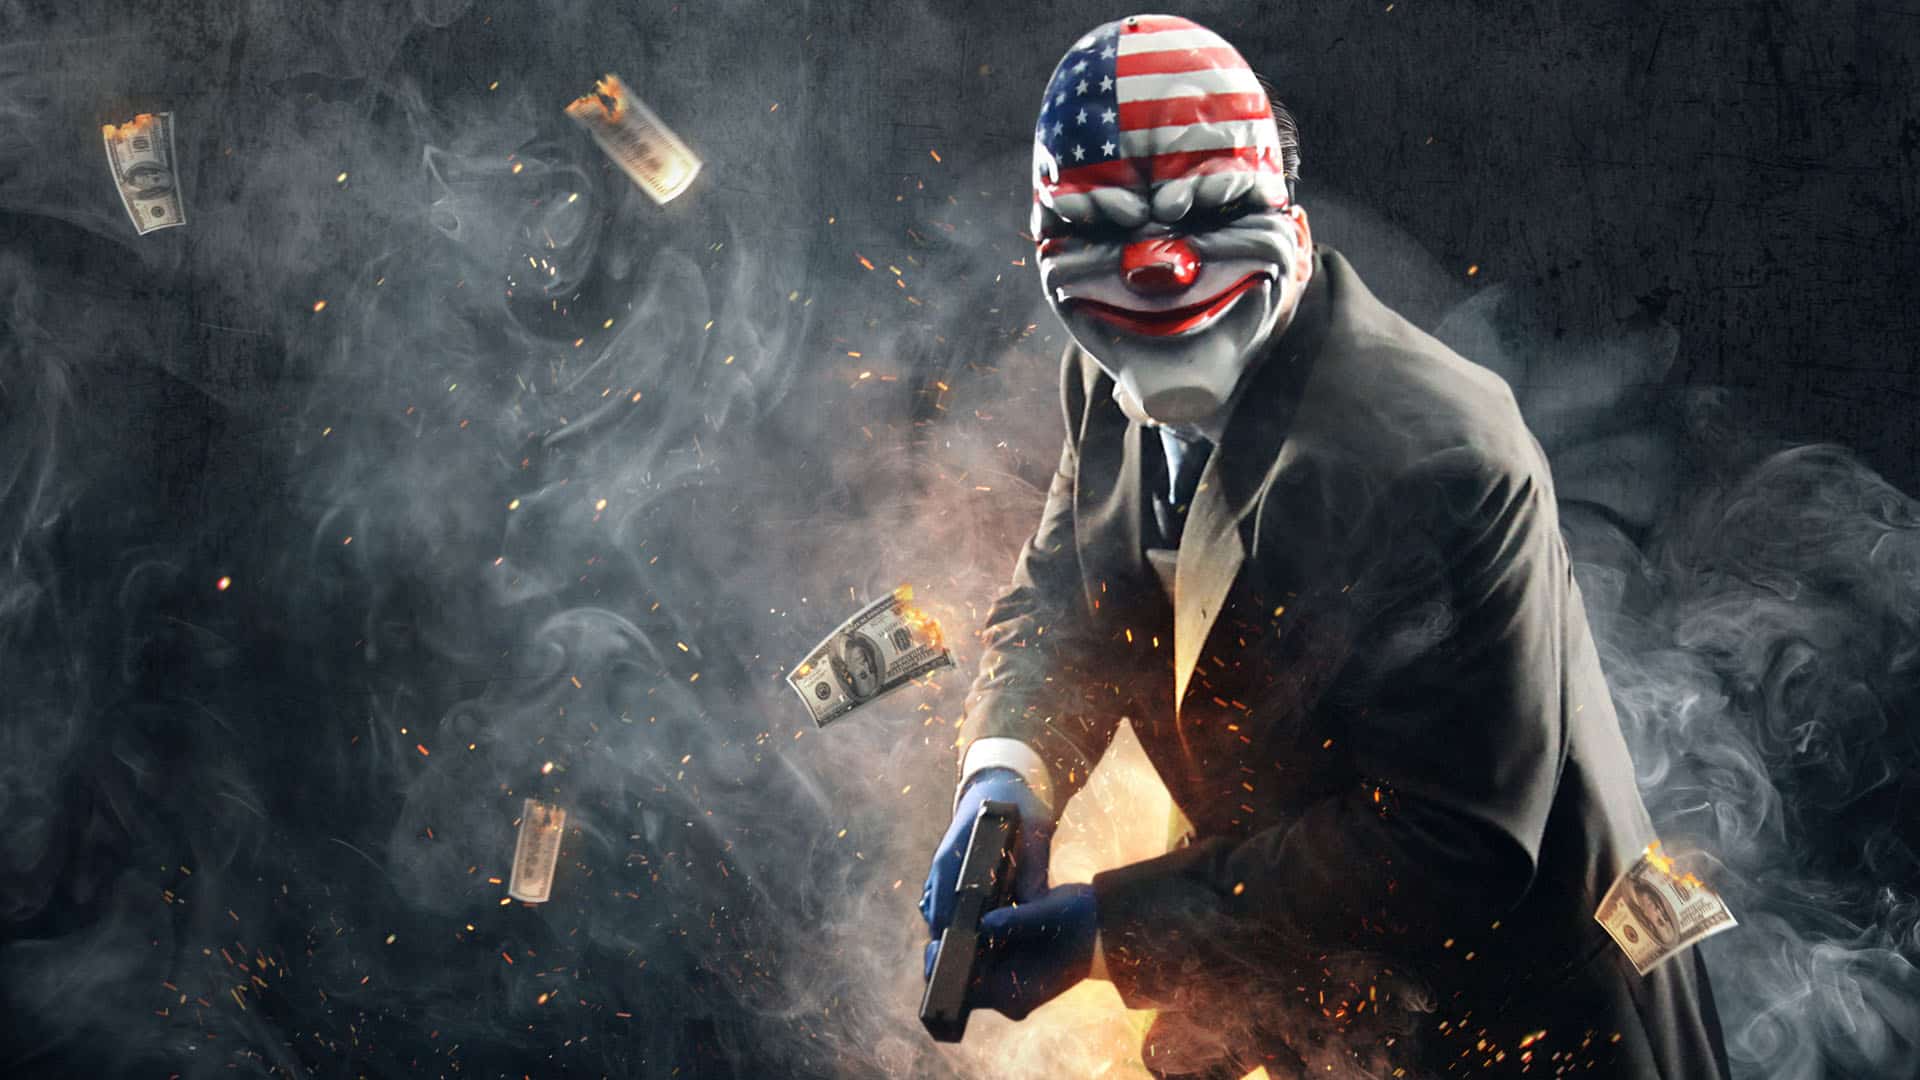 payday vr download